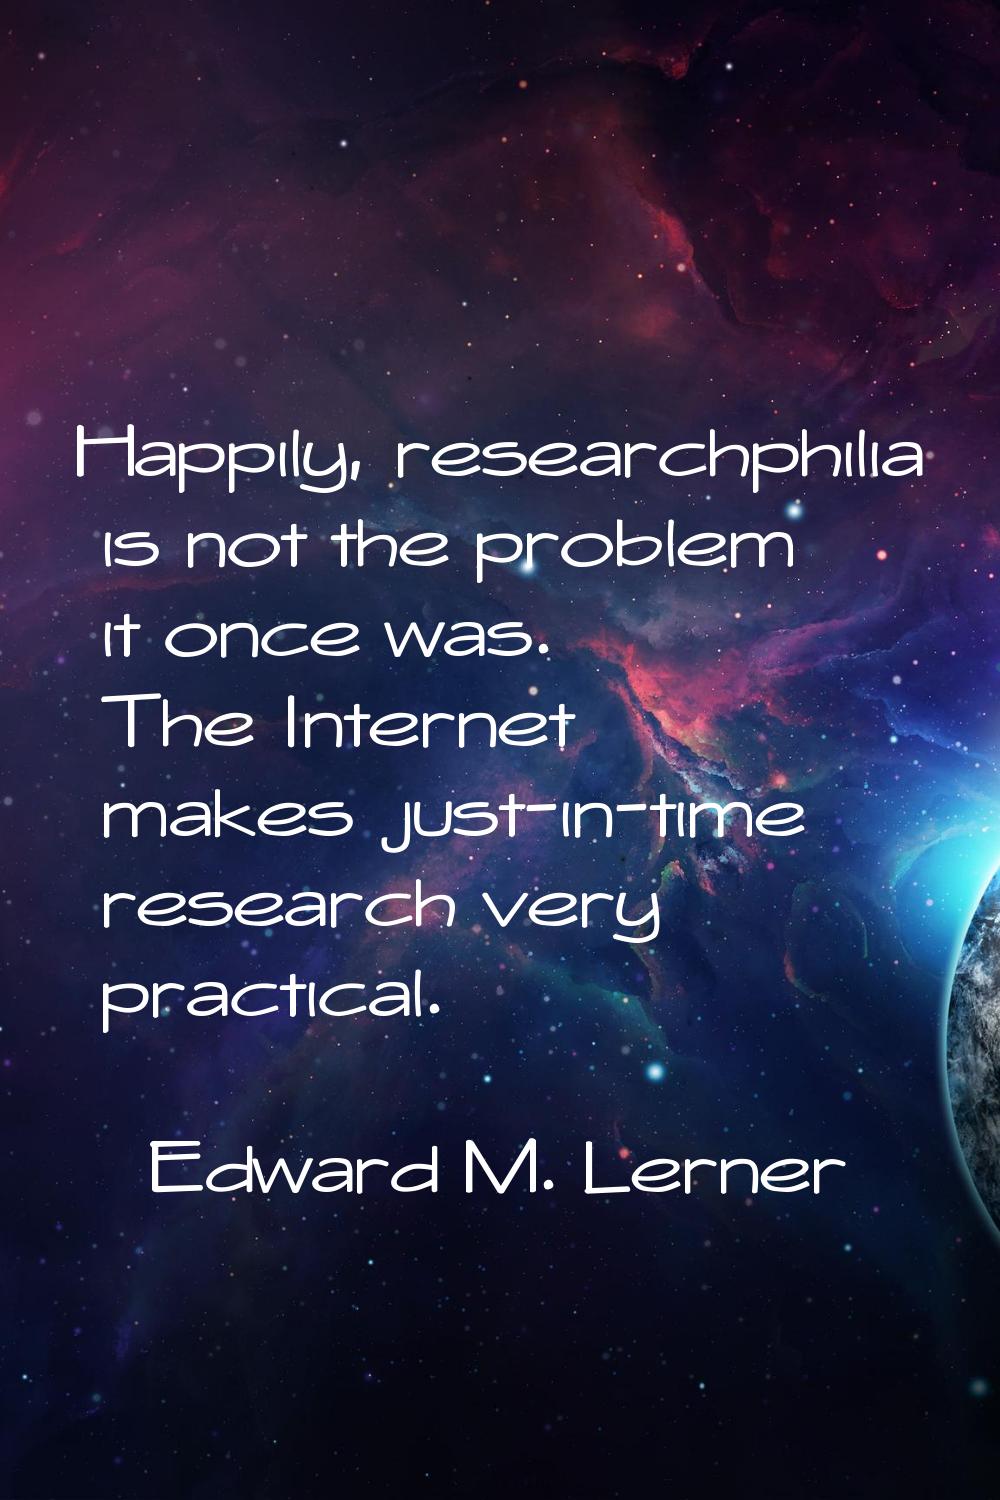 Happily, researchphilia is not the problem it once was. The Internet makes just-in-time research ve